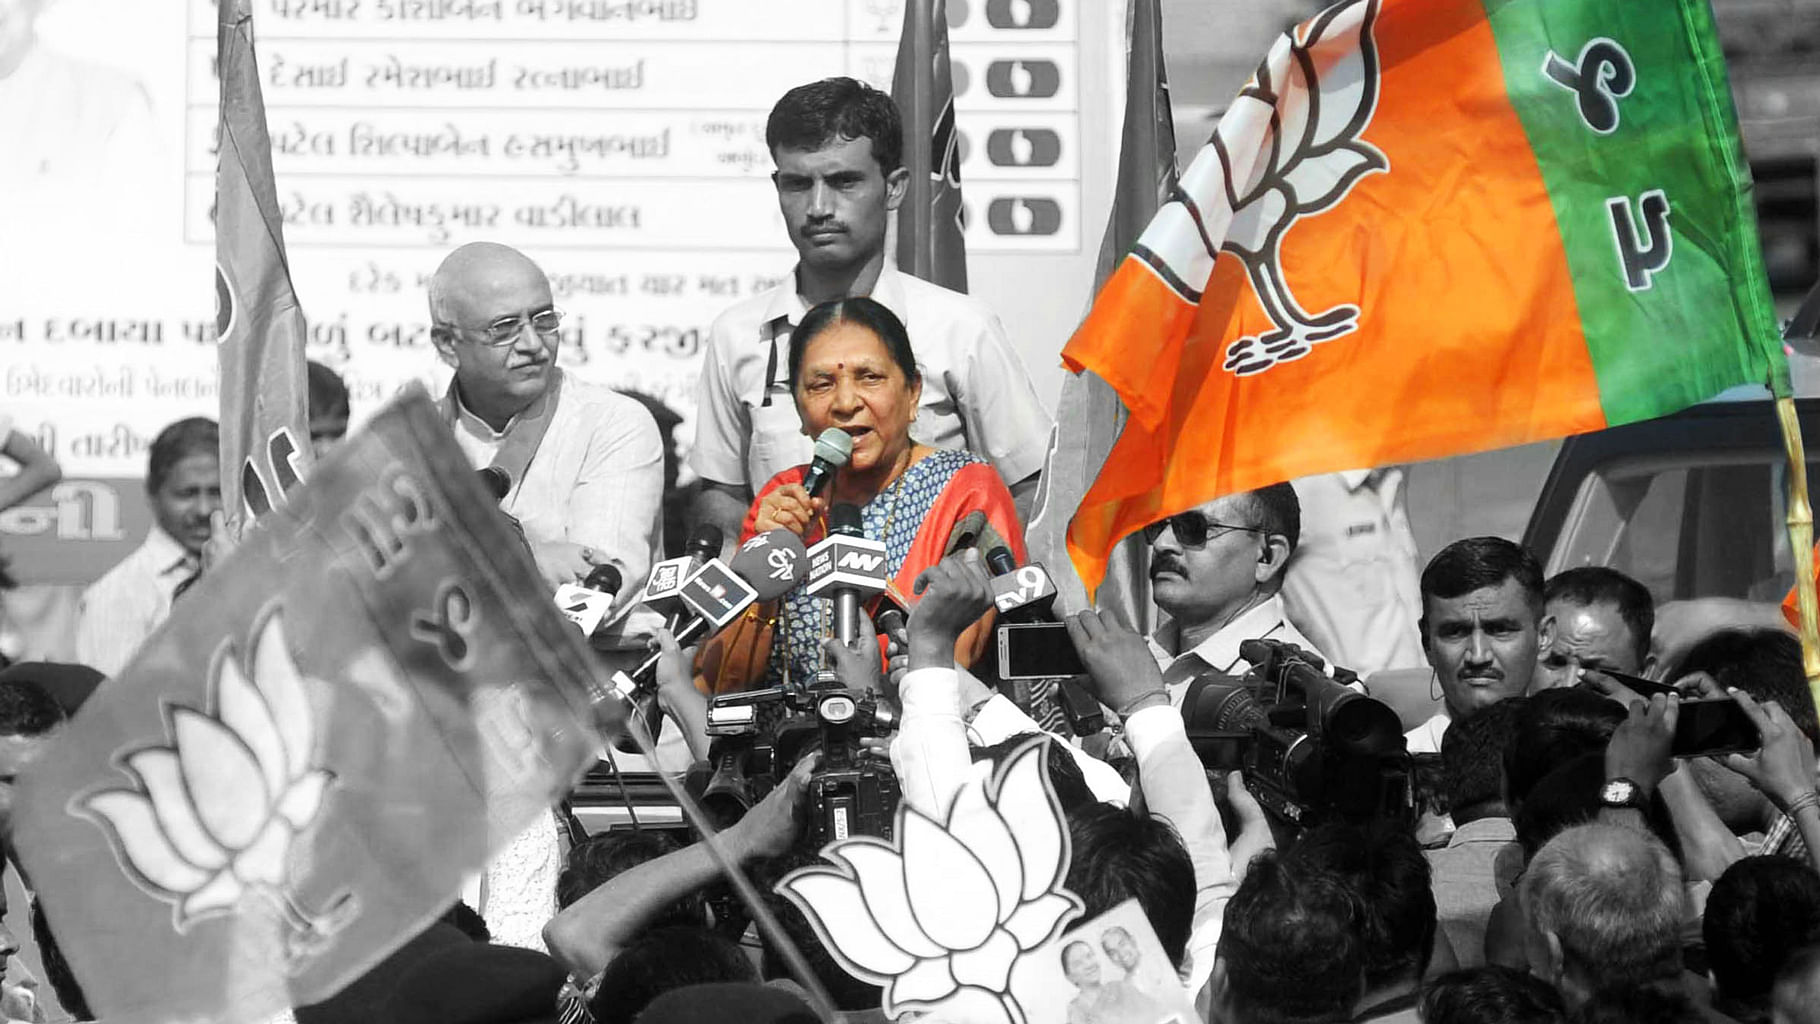 Gujarat Chief Minister Anandiben Patel at a road show in Ahmedabad on 17 November 2015. (Photo: IANS/ Altered by <b>The Quint</b>)